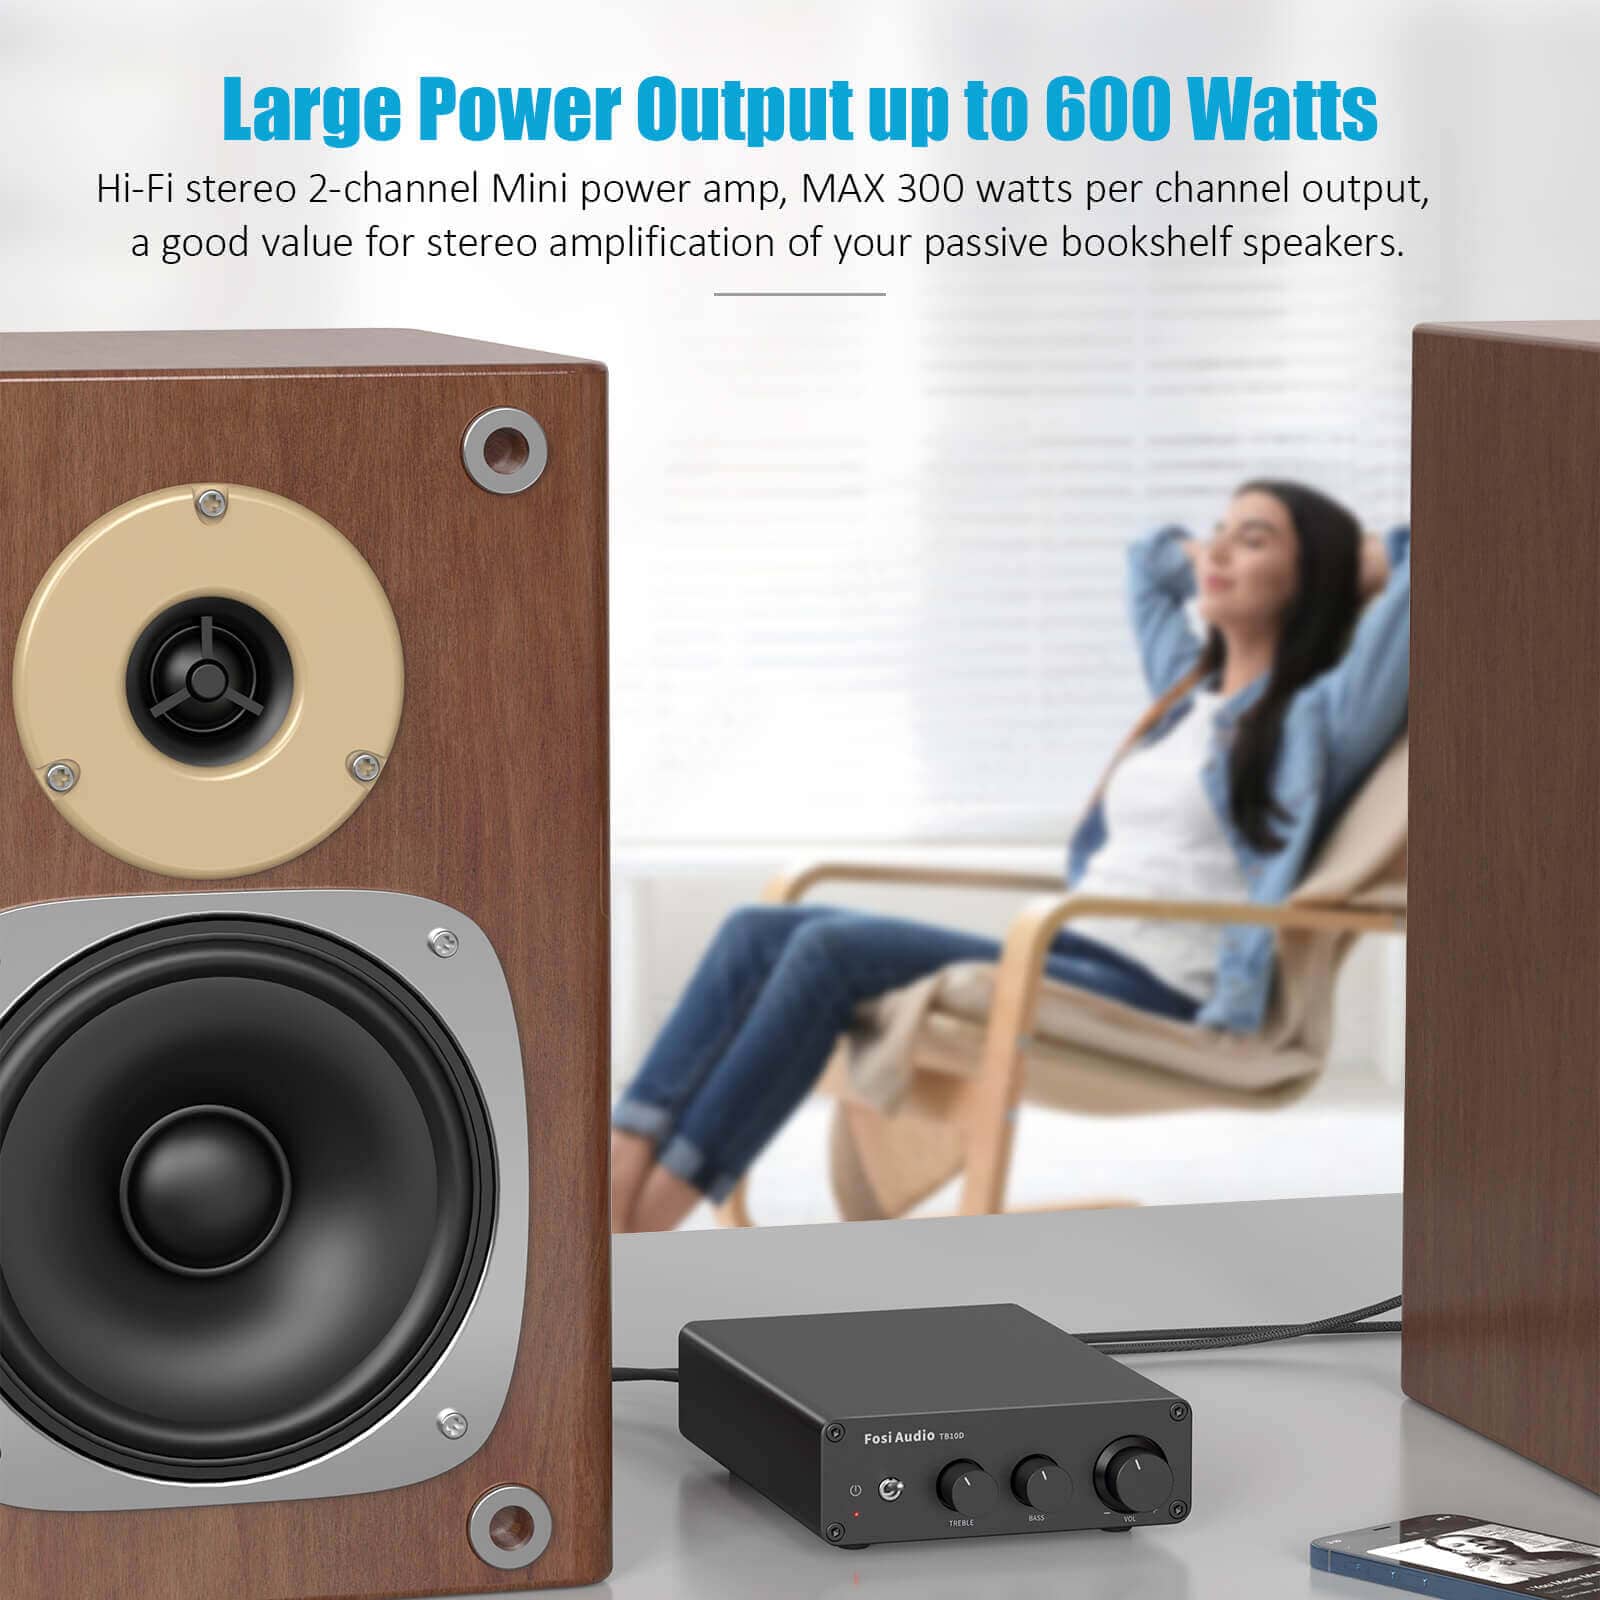 Large Power Output up to 600 Watts, HIFI stereo 2 channel mini power amp, a good value for stereo amplification of your passive bookshelf speakers